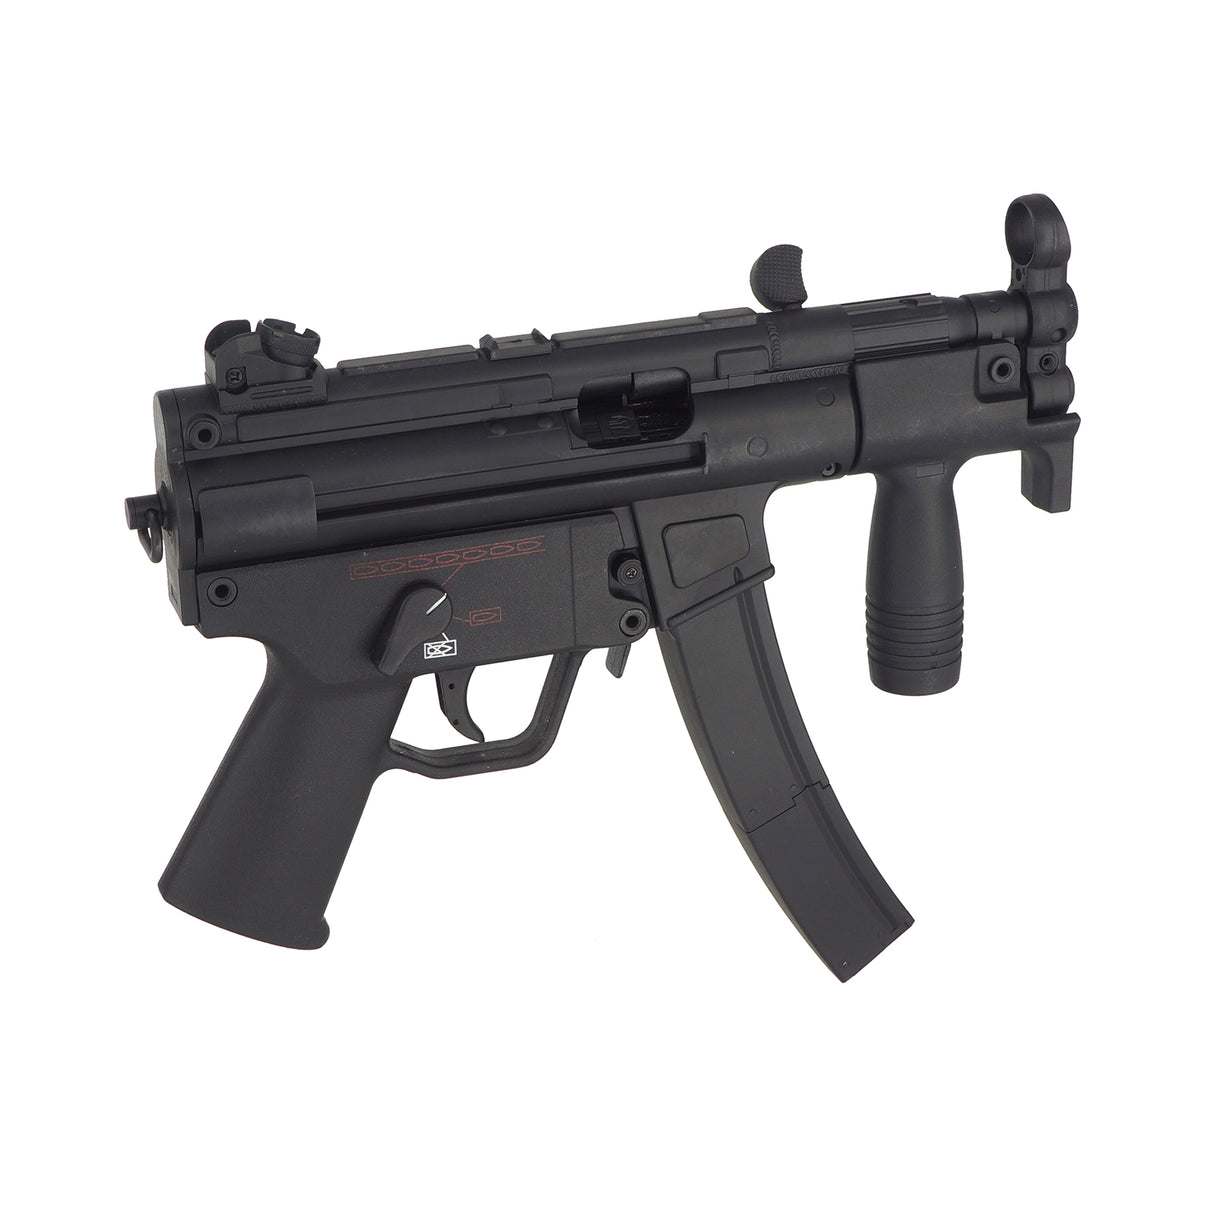 WELL MP5K Gas Blowback SMG ( WELL-G55 )